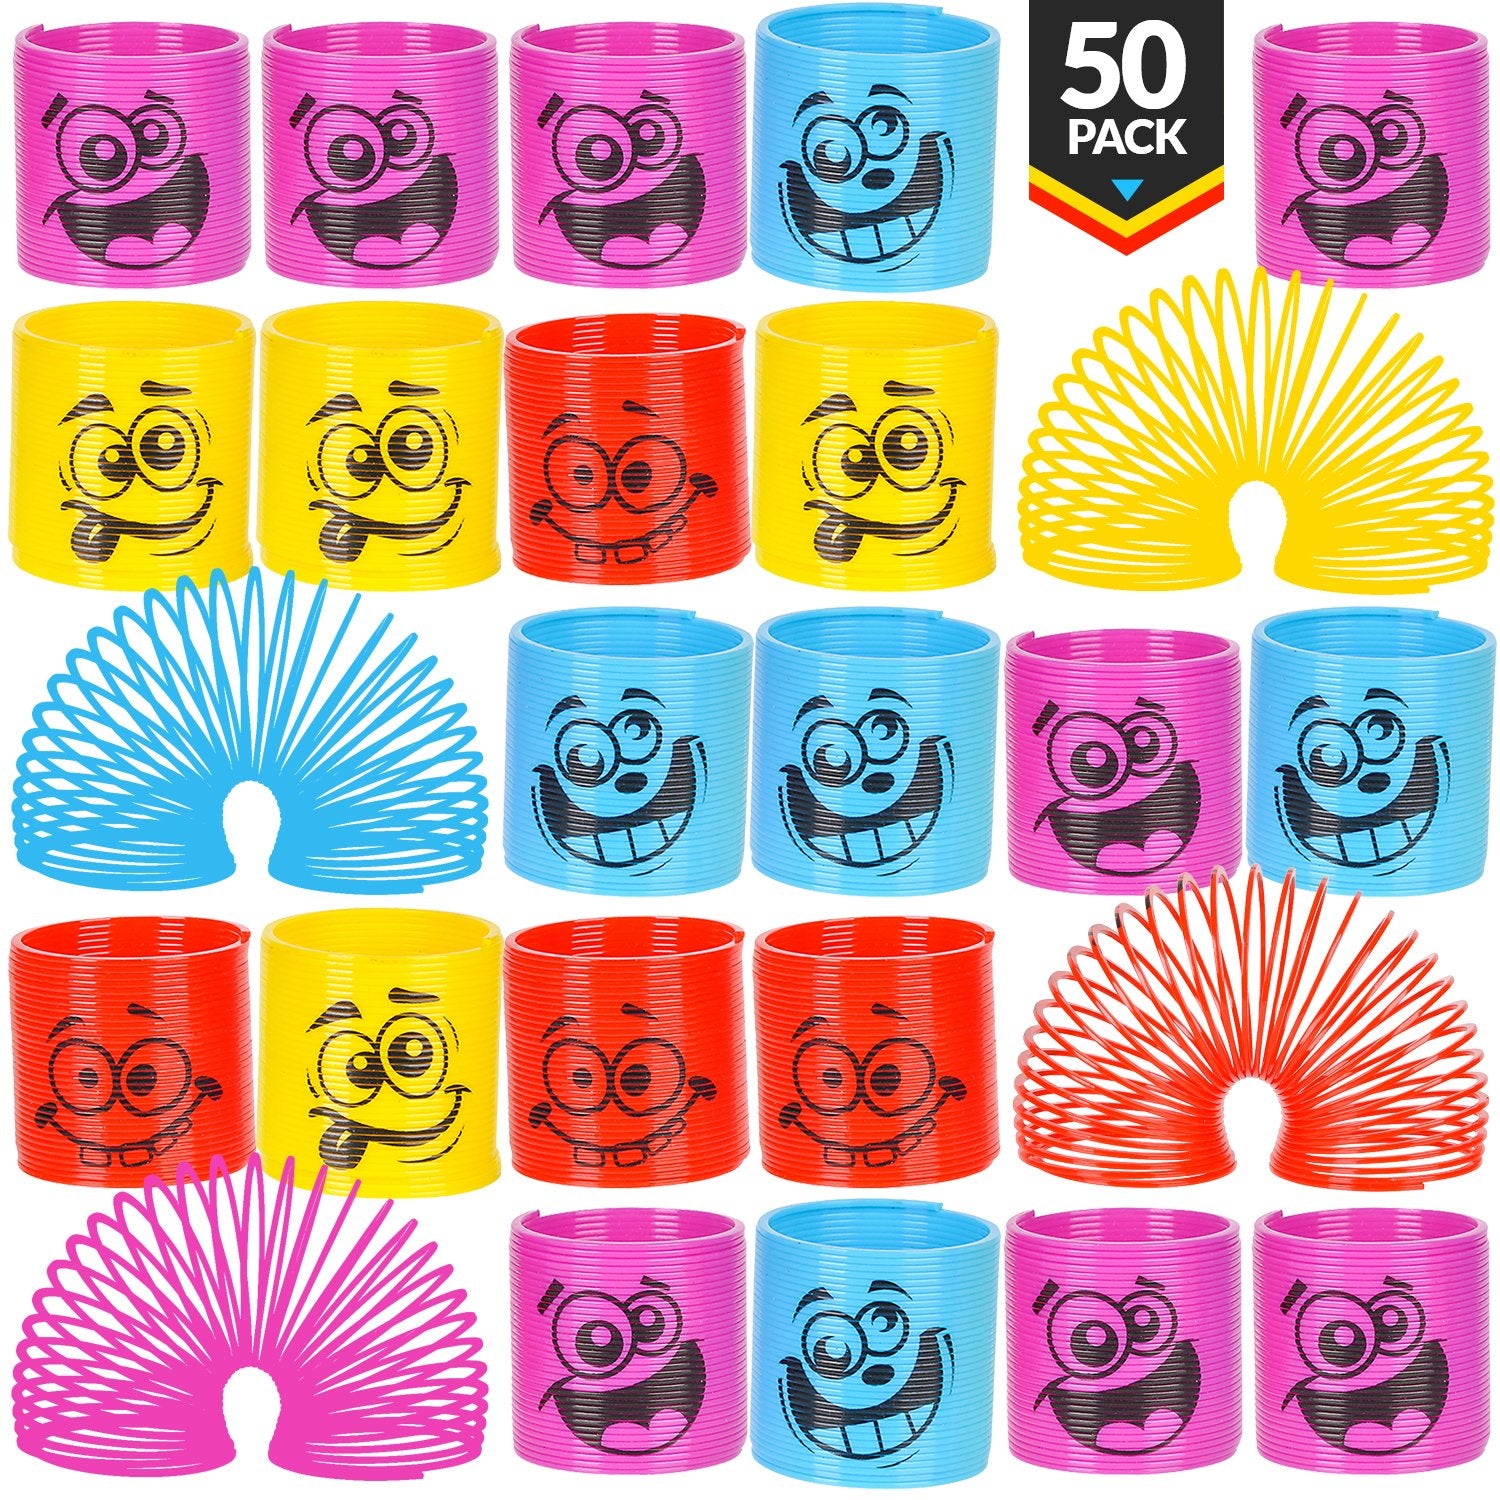 Mega Pack Of 50 Coil Springs - Assorted Emoji Silly Faces And Colors, Mini Spring Toy For Party Favor, Carnival Prize, Gift Bag Filler, Stocking Stuffers